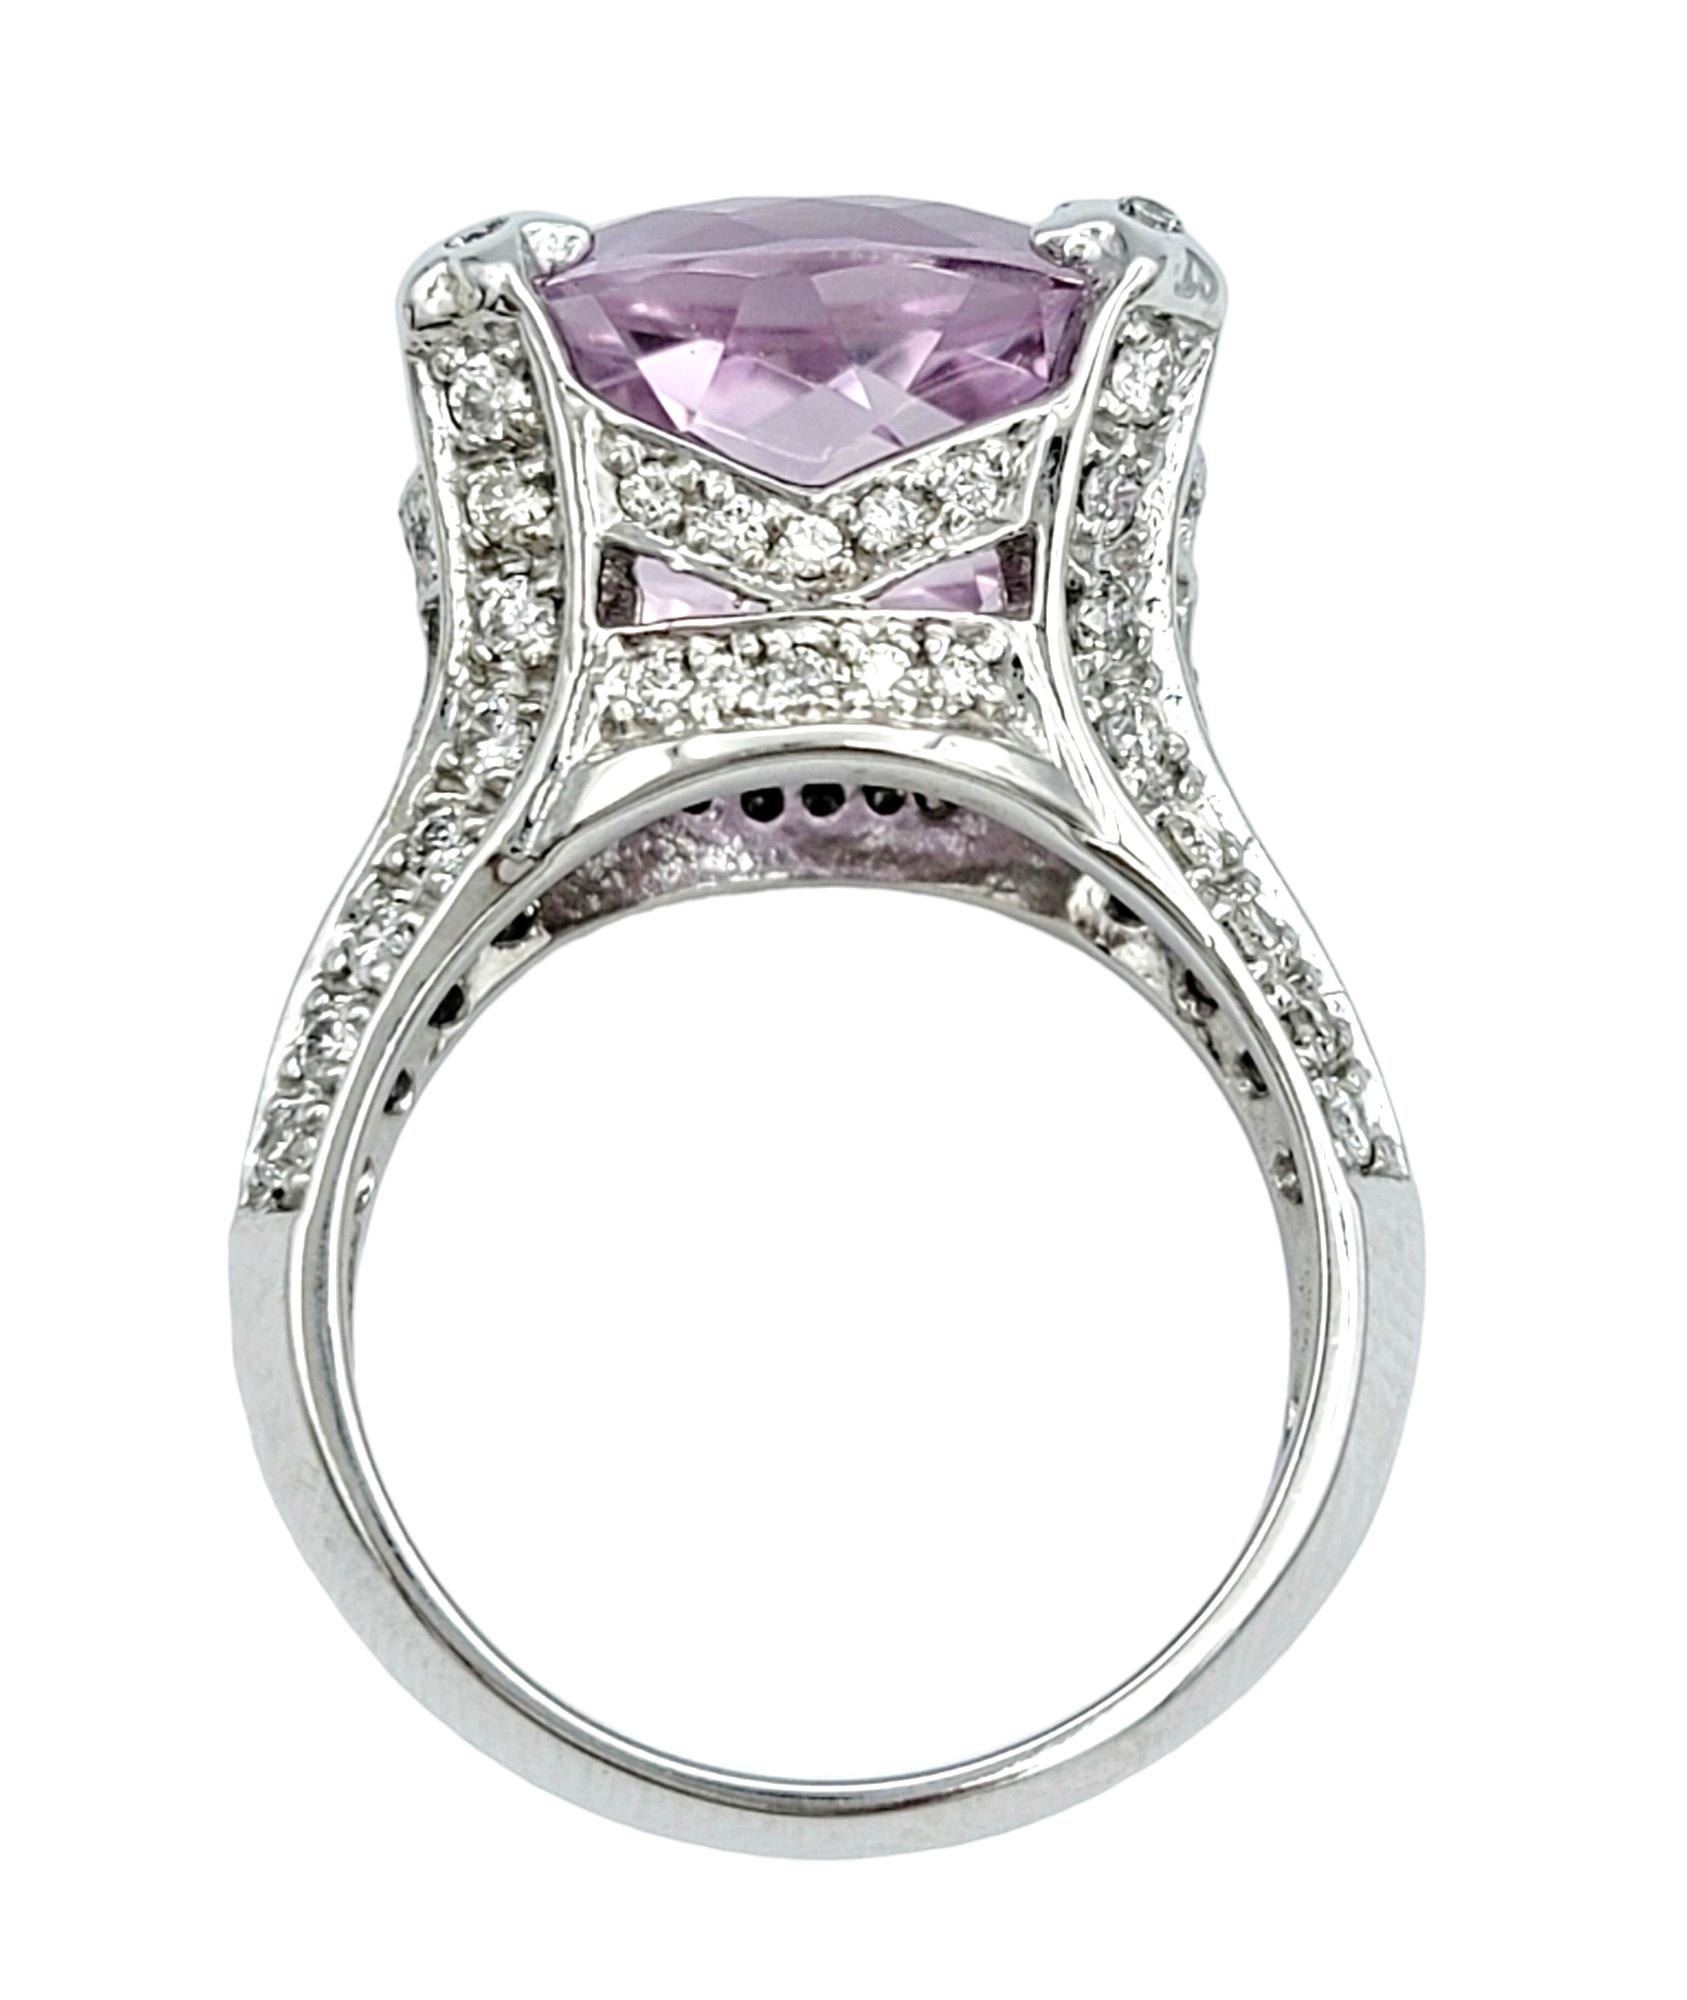 Sonia B. Oval Cut Pink Kunzite Ring with Pave Diamonds in 14 Karat White Gold For Sale 1